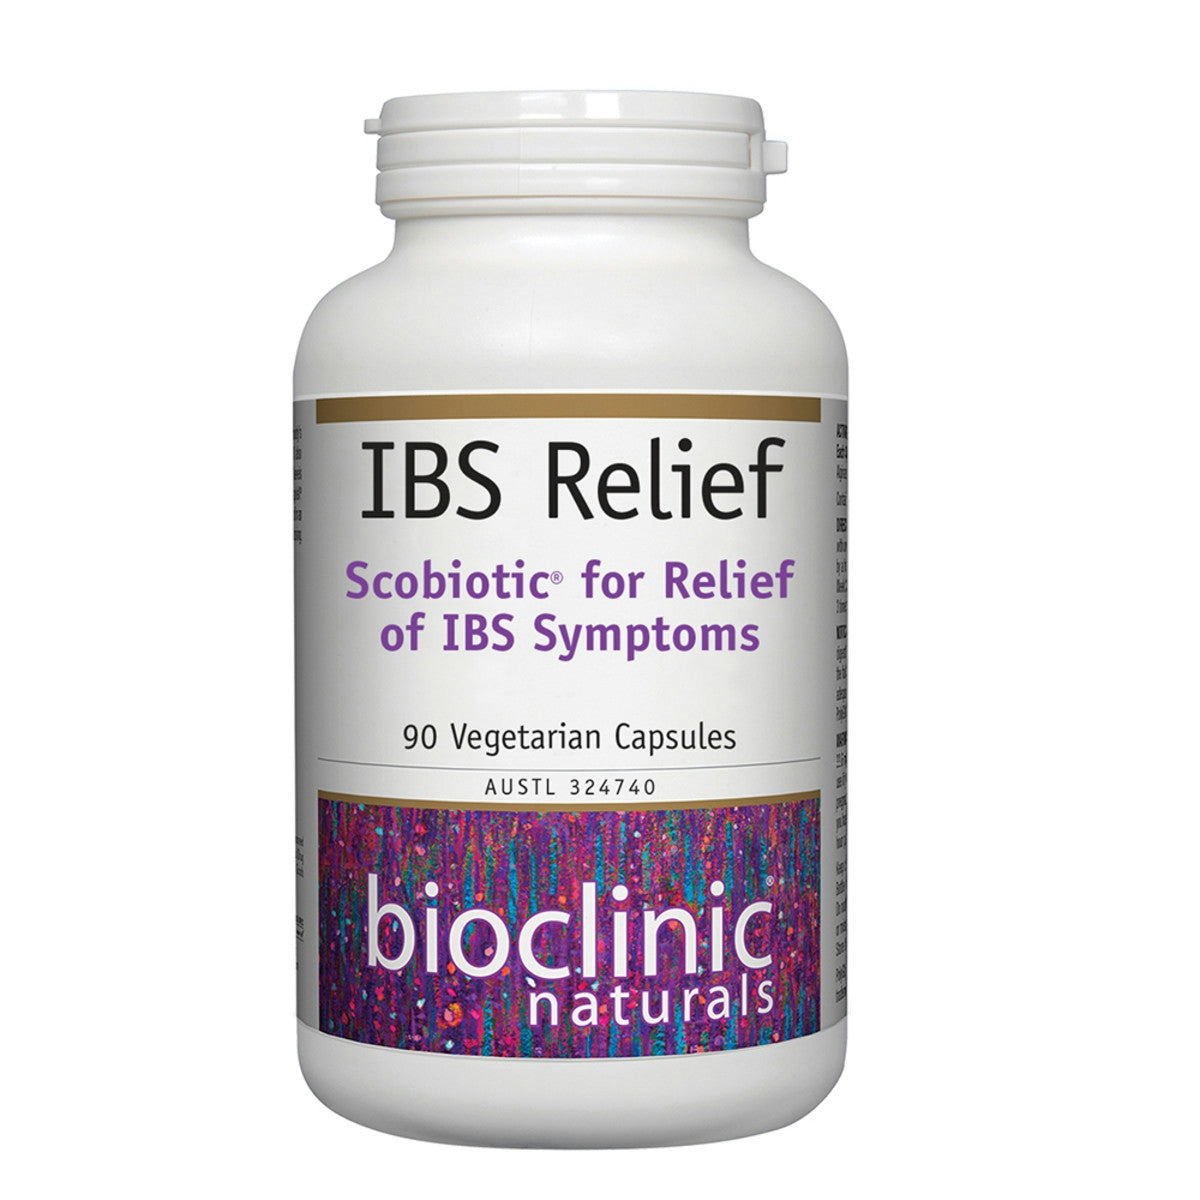 Image of Bioclinic Naturals IBS Relief  90vc with a white background